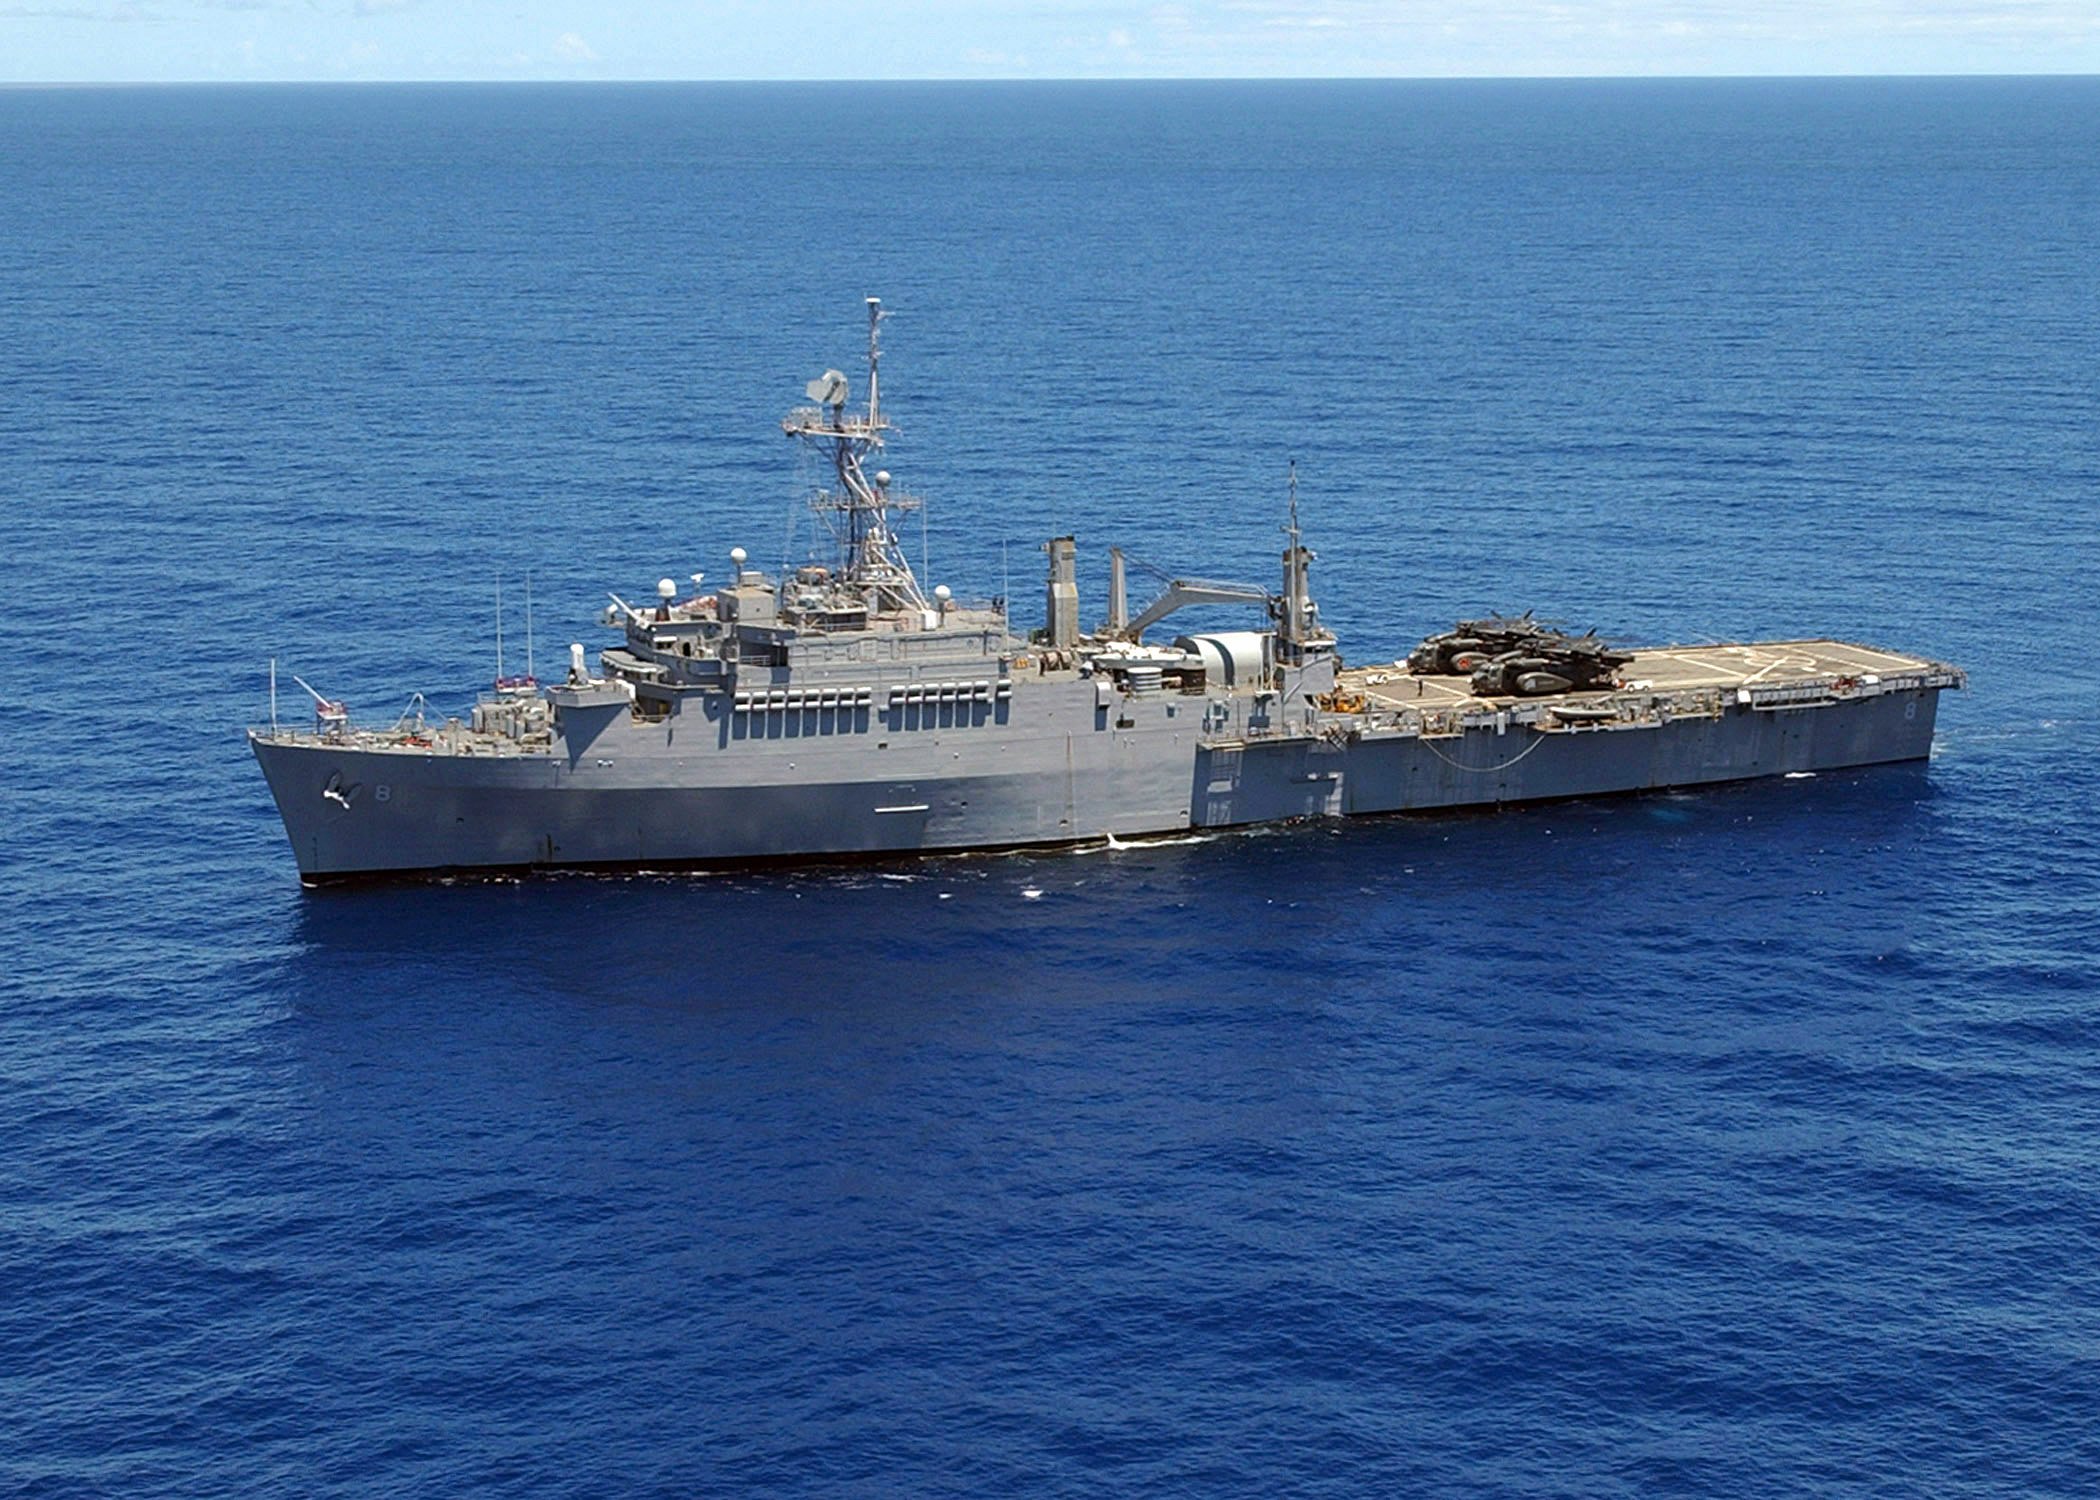  USS Dubuque, the 569 foot Naval ship Darrel served on during the Vietnam War. 